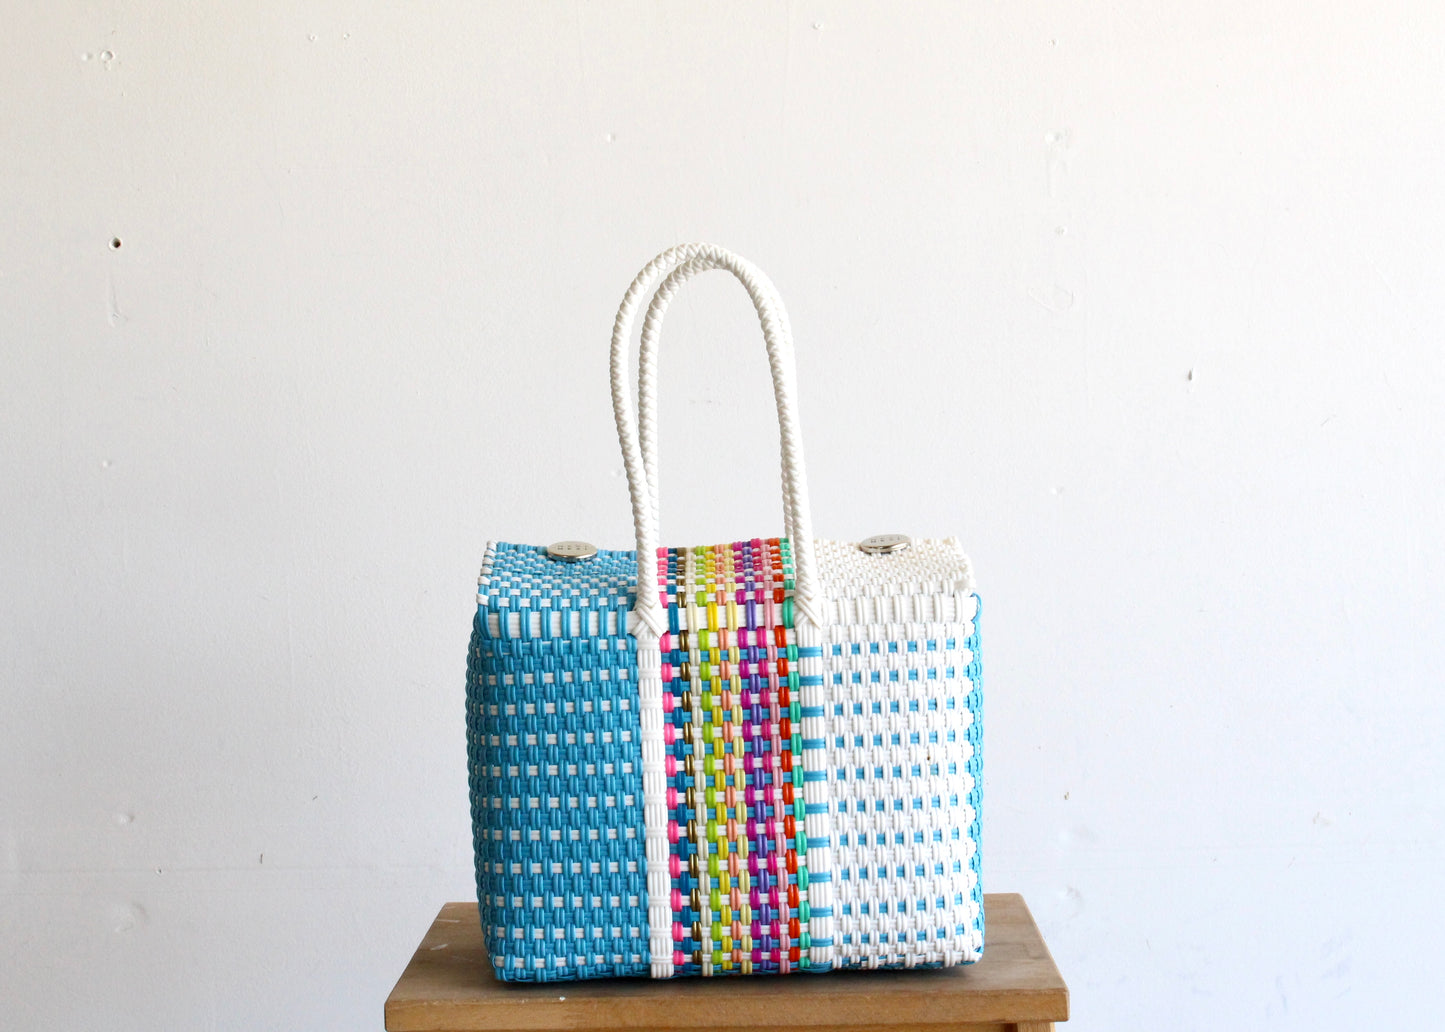 Baby Blue, White & Colors Handwoven Handbag by MexiMexi